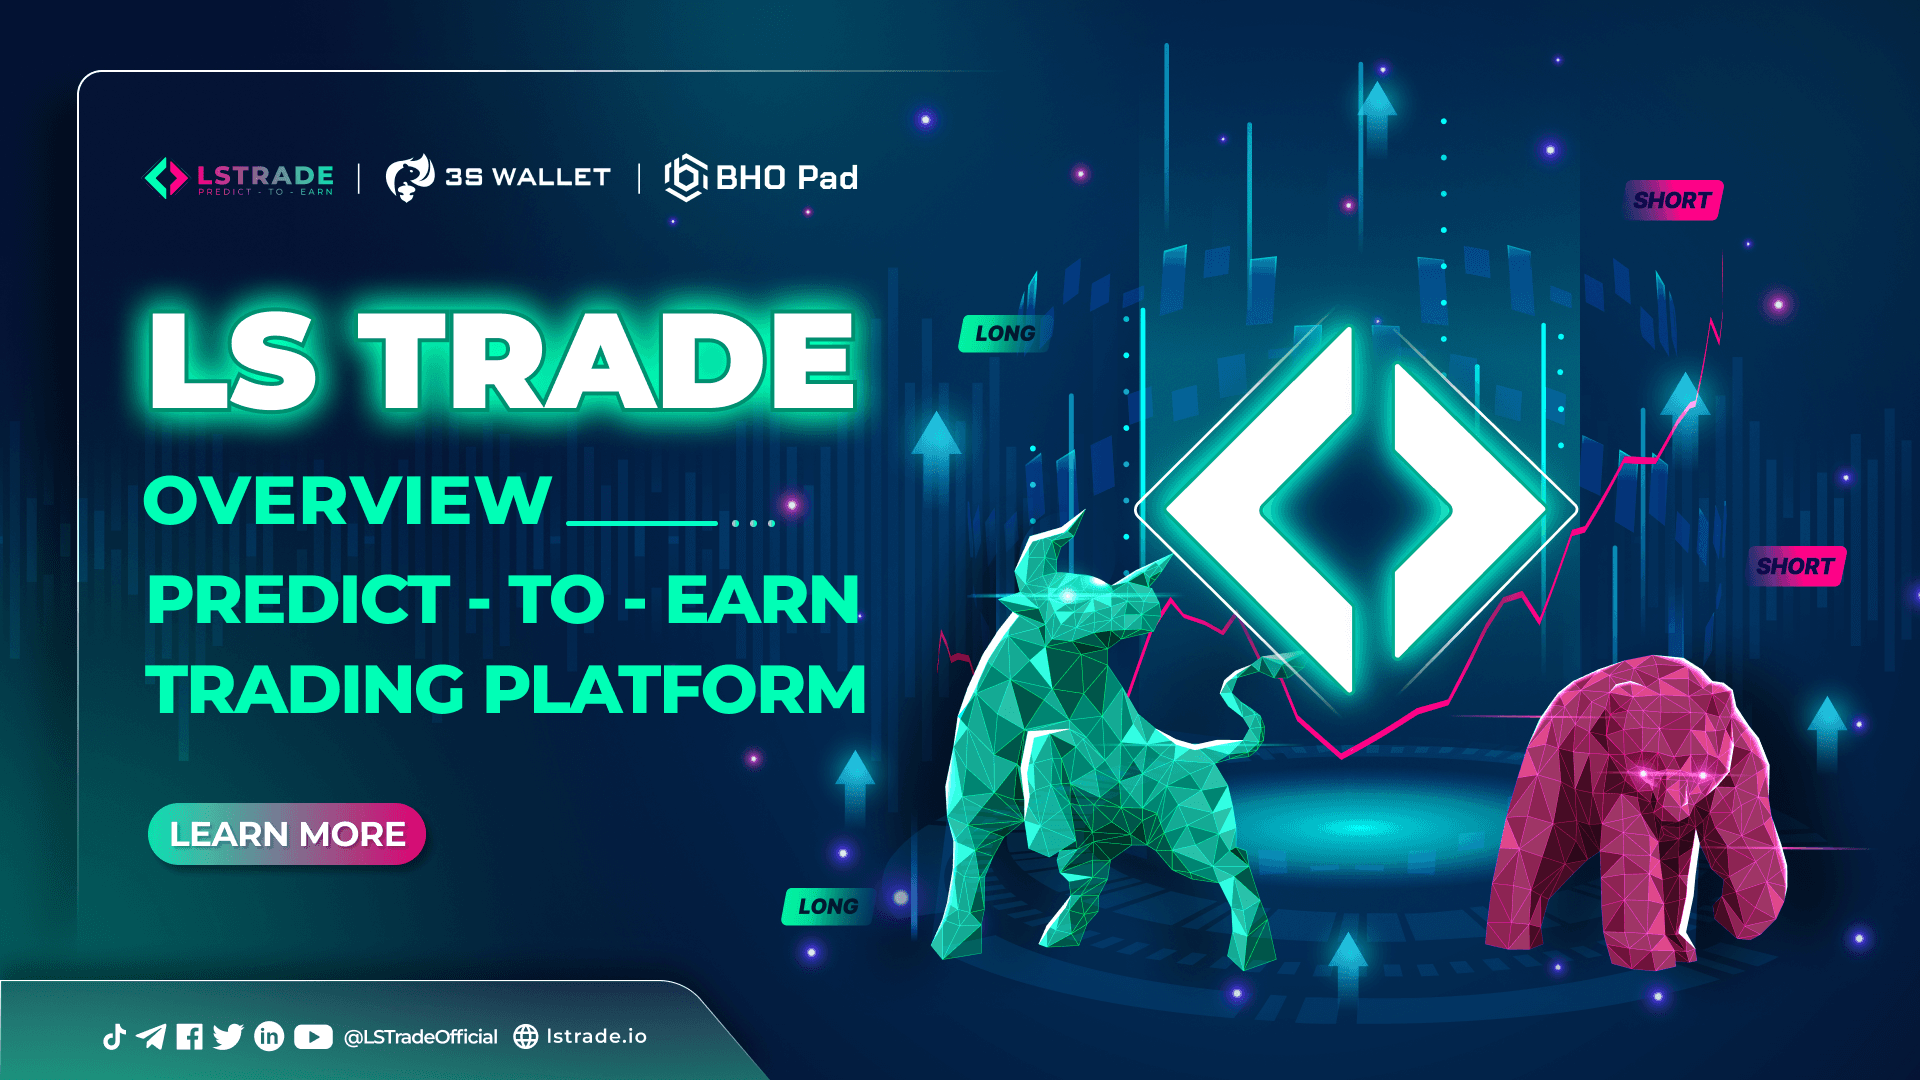 LS TRADE OVERVIEW - PREDICT-TO-EARN TRADING PLATFORM